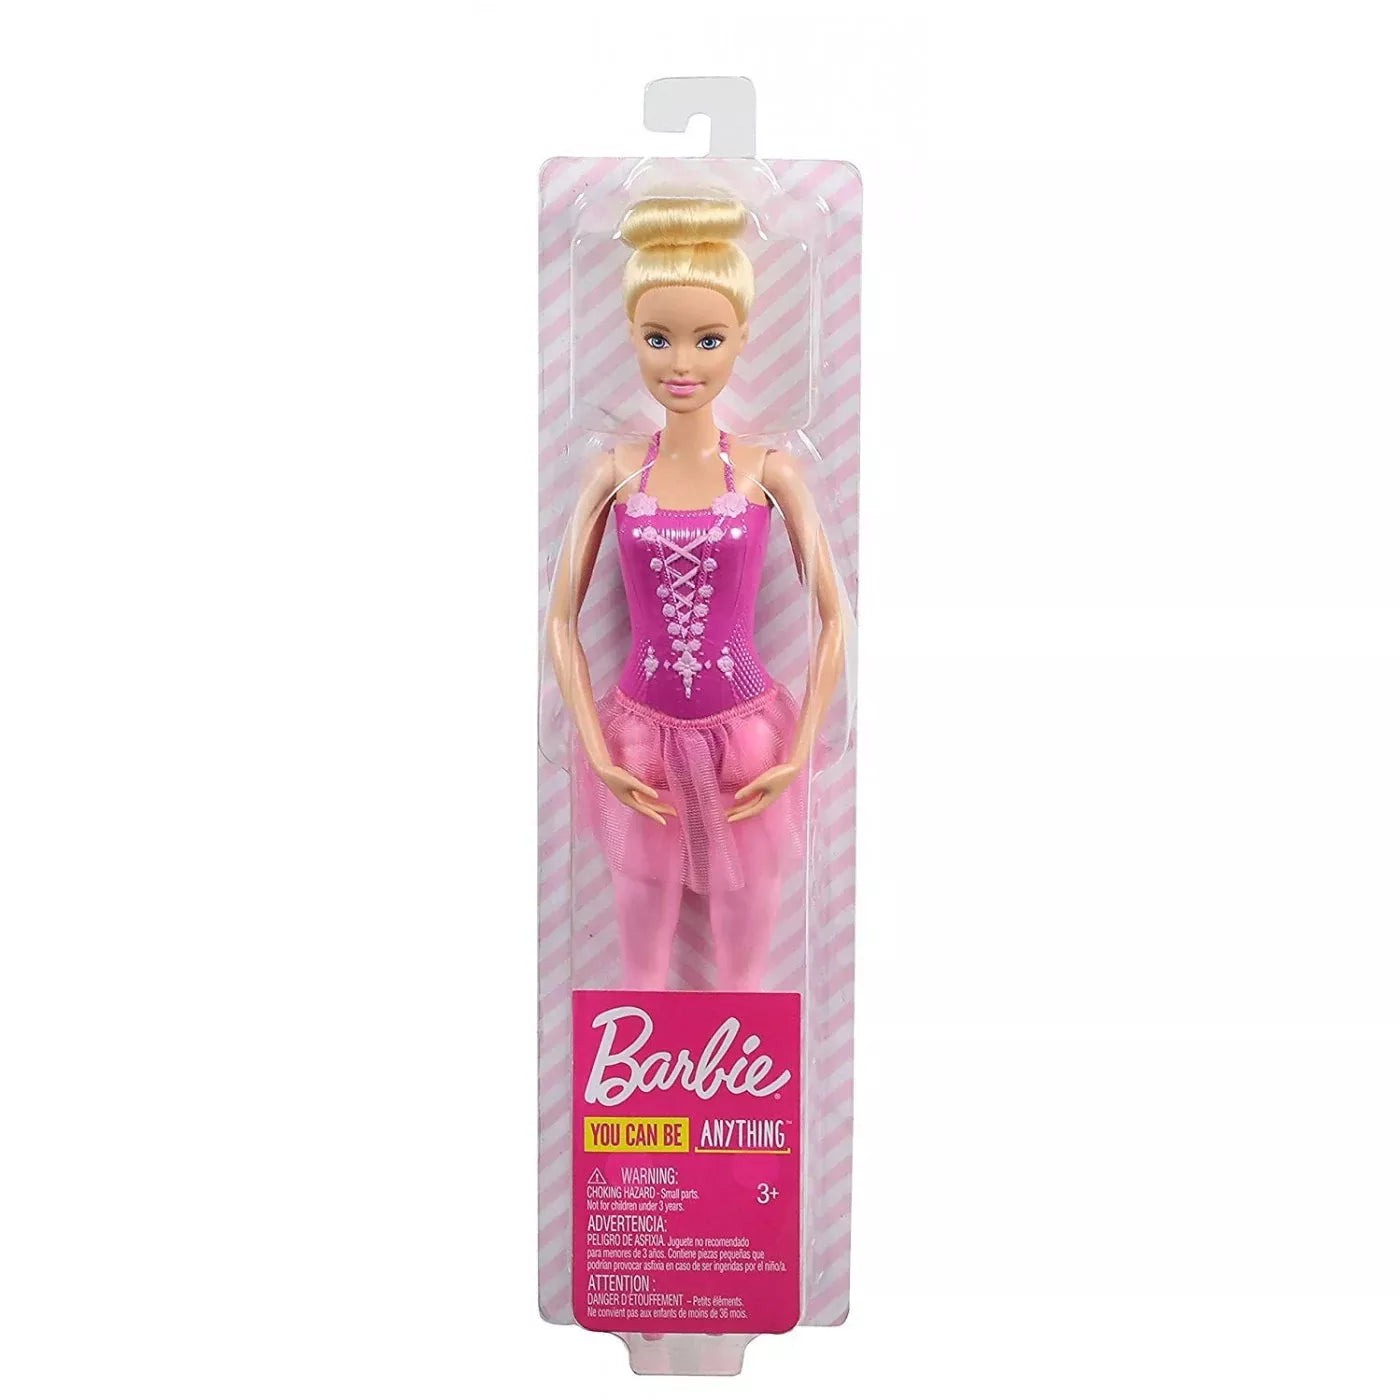 Barbie Ballerina With Tutu And Sculpted Toe Shoes by Mattel -Mattel - India - www.superherotoystore.com